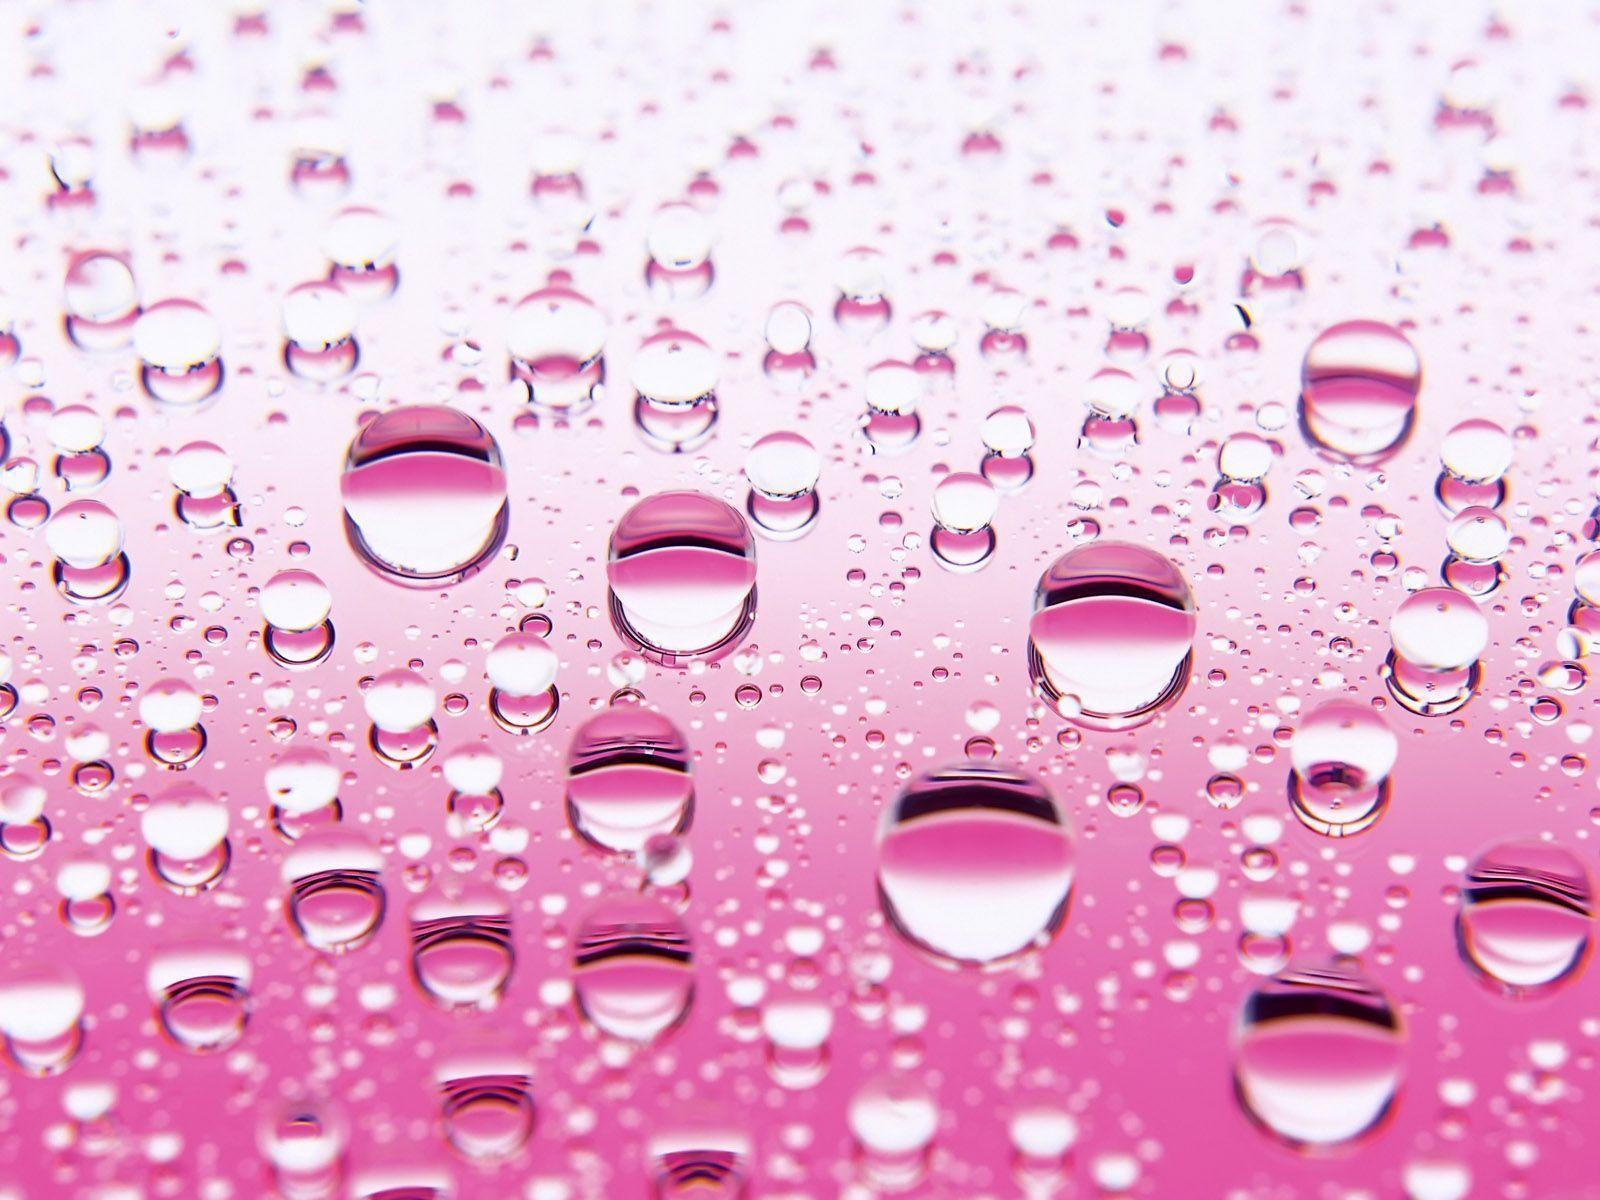 Water Bubbles Wallpaper Image & Picture